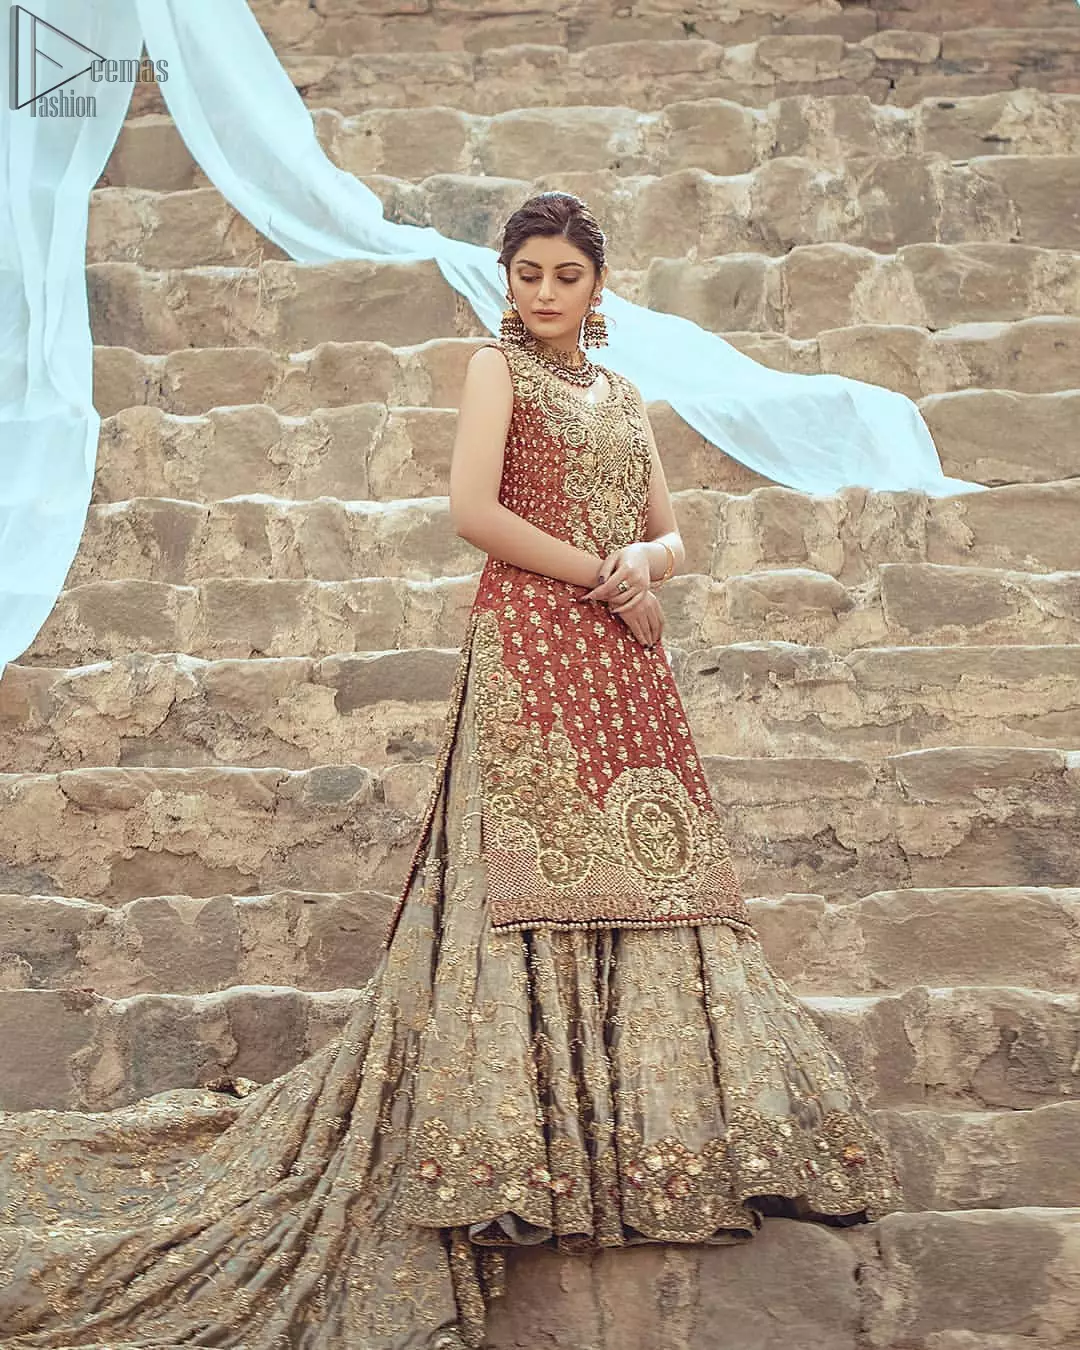 An uplifting look for any formal occasion. This wedding outfit is emphasized with zardozi work. The shirt is beautifully decorated with embroidered neckline, a central geometric motif on the border, and scattered tiny floral motifs all over the ground. Pair it up with a pastel green back train lehenga enhancing with the art of classical heritage showcasing the craftsmanship of zardozi work, multiple colors embroidery, and finishing with scalloped borders. The outfit is coordinated with a net dupatta with hand-embroidered borders on all four sides and sequins spray on the ground.